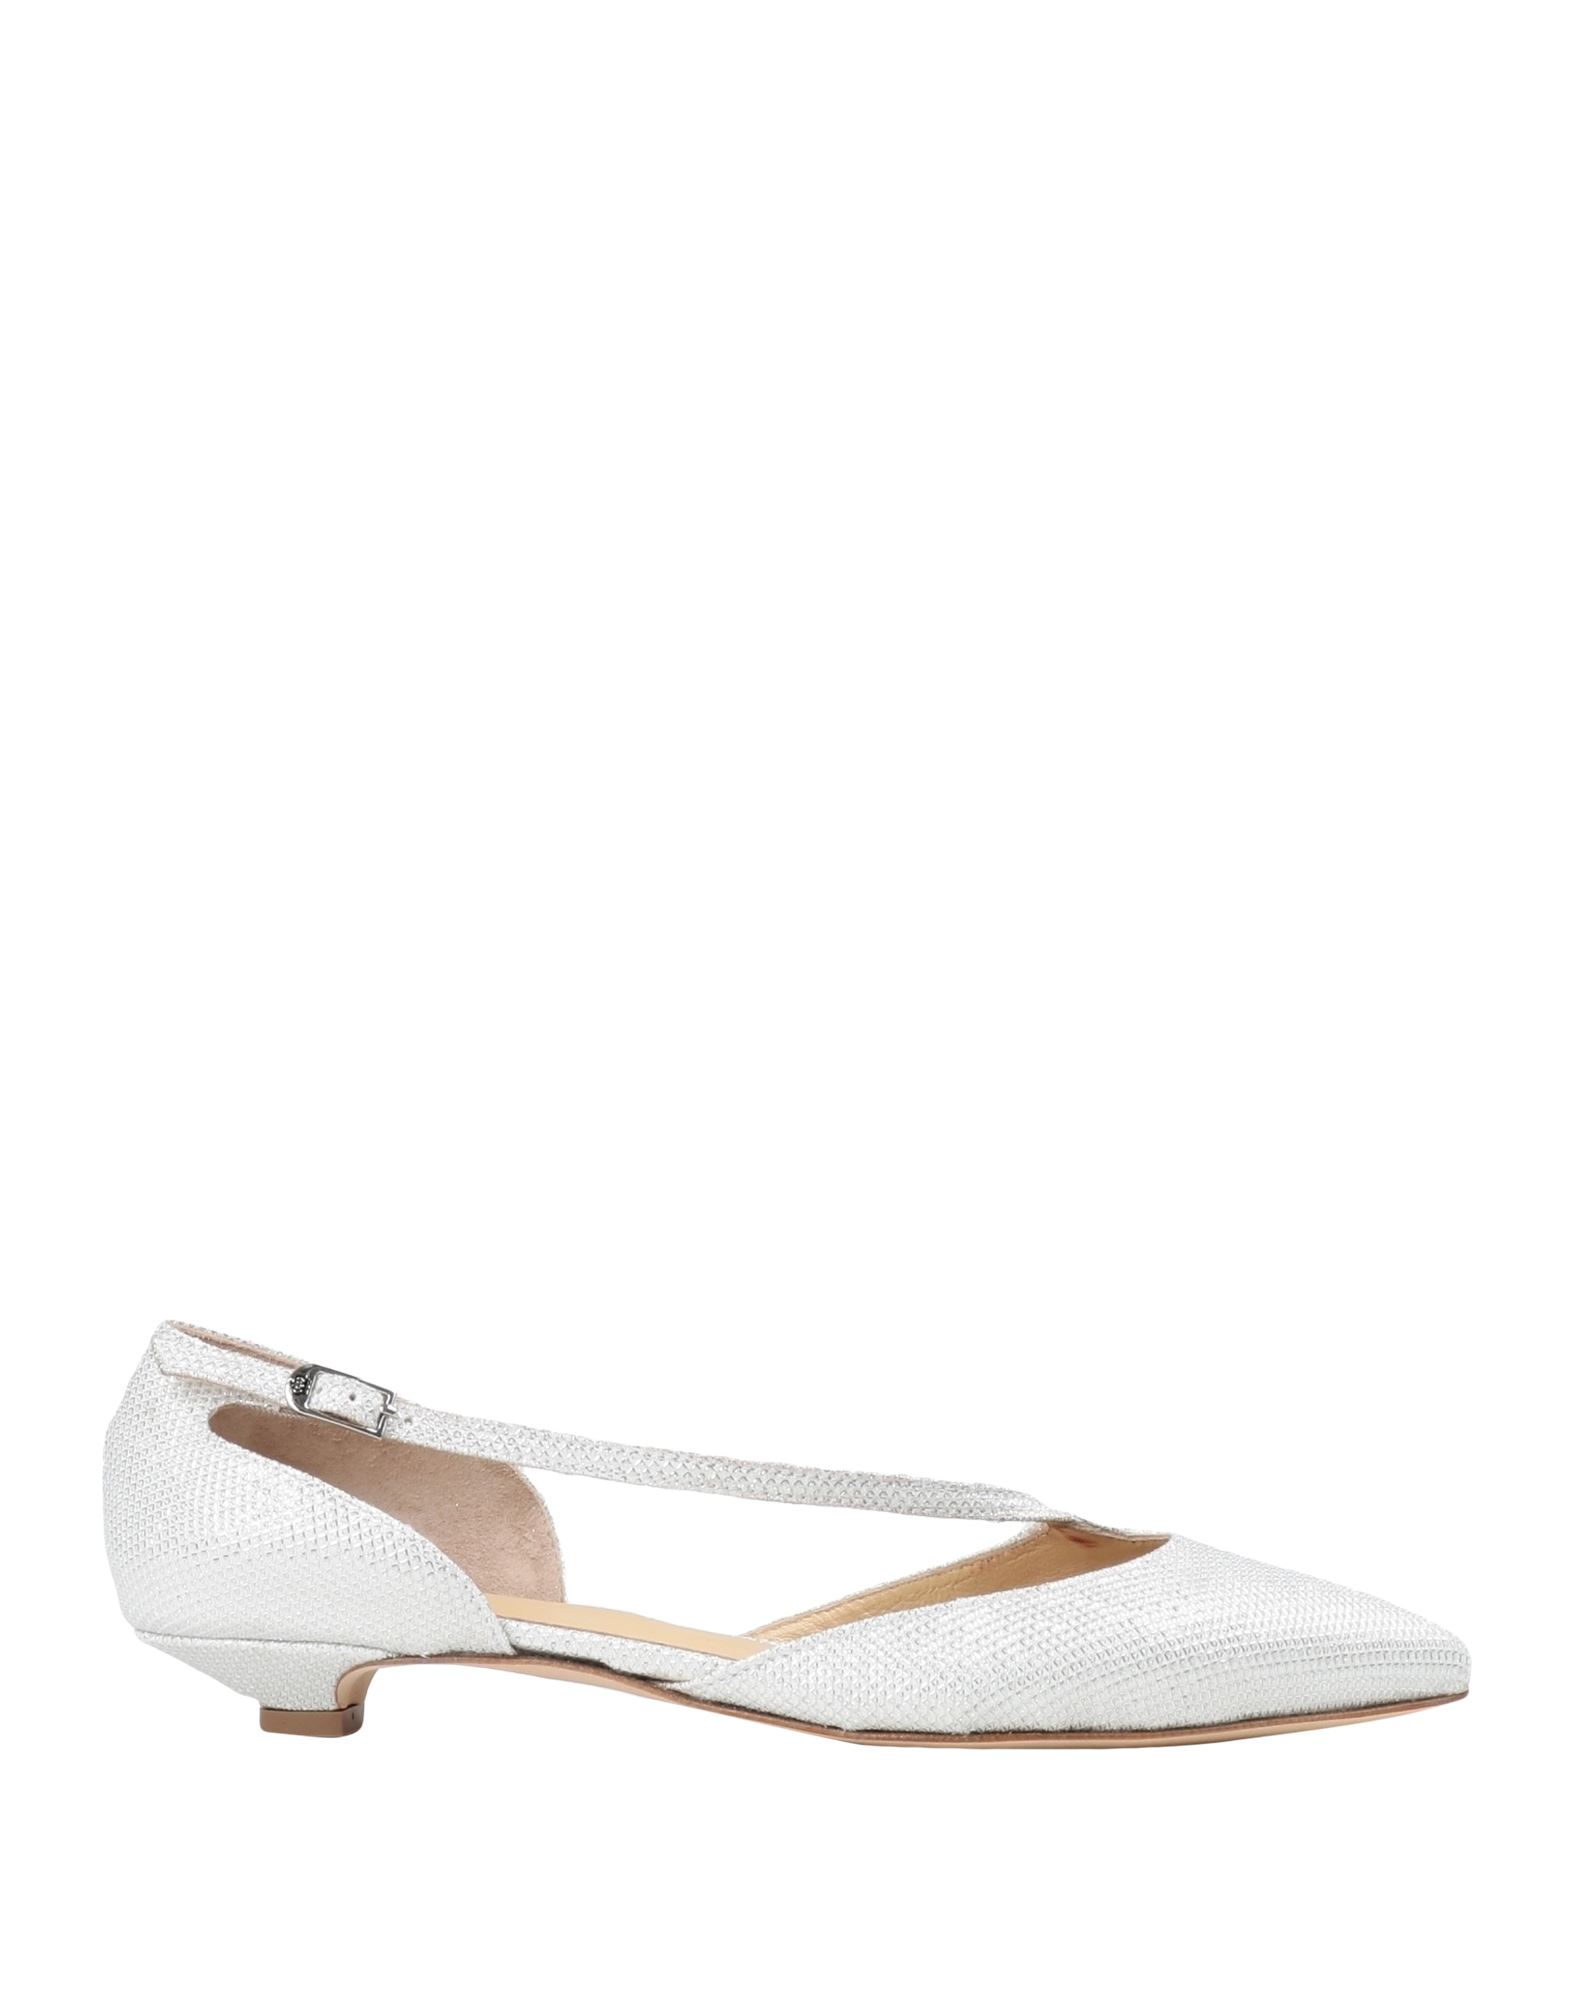 L'arianna Woman Ballet Flats White Size 7 Synthetic Fibers, Soft Leather